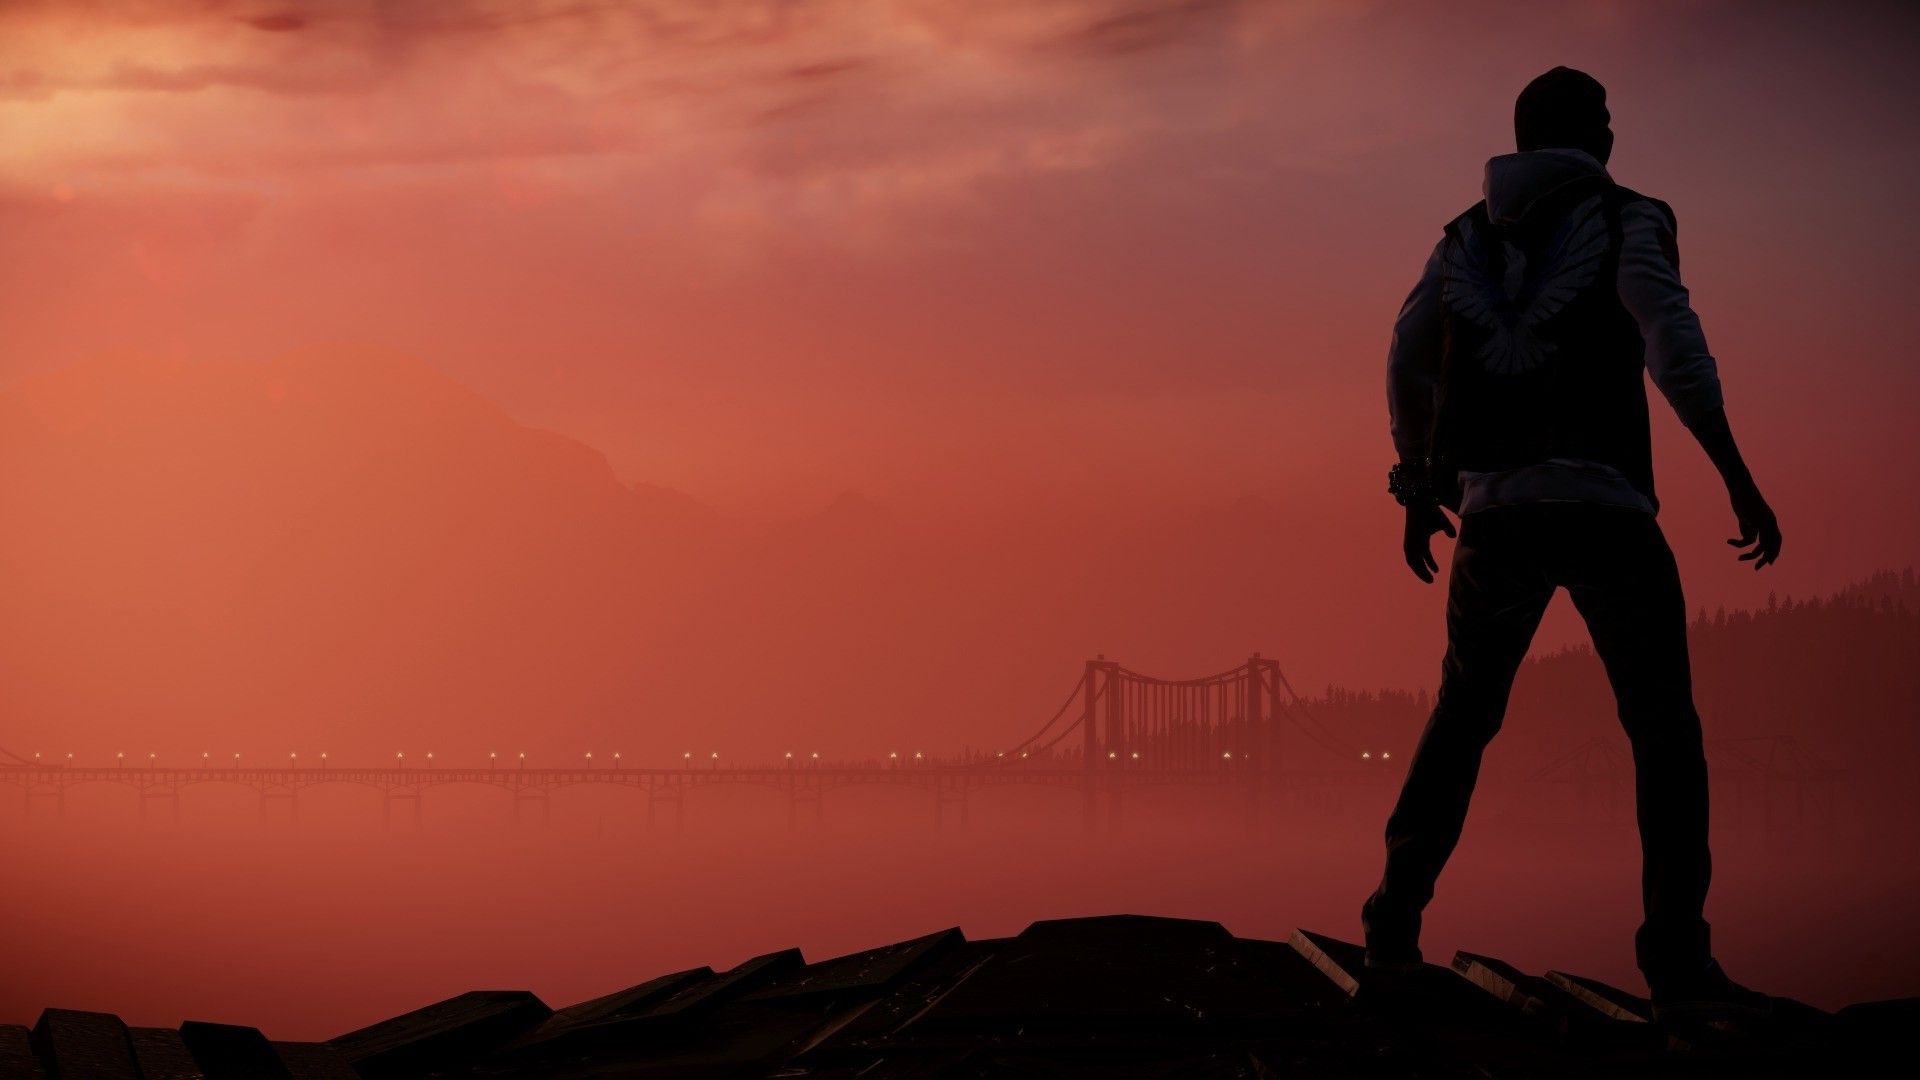 1920x1080 delsin rowe infamous second son seattle photo mode good karma silhouette video games playstation 4 sony wallpaper JPG 122 kB